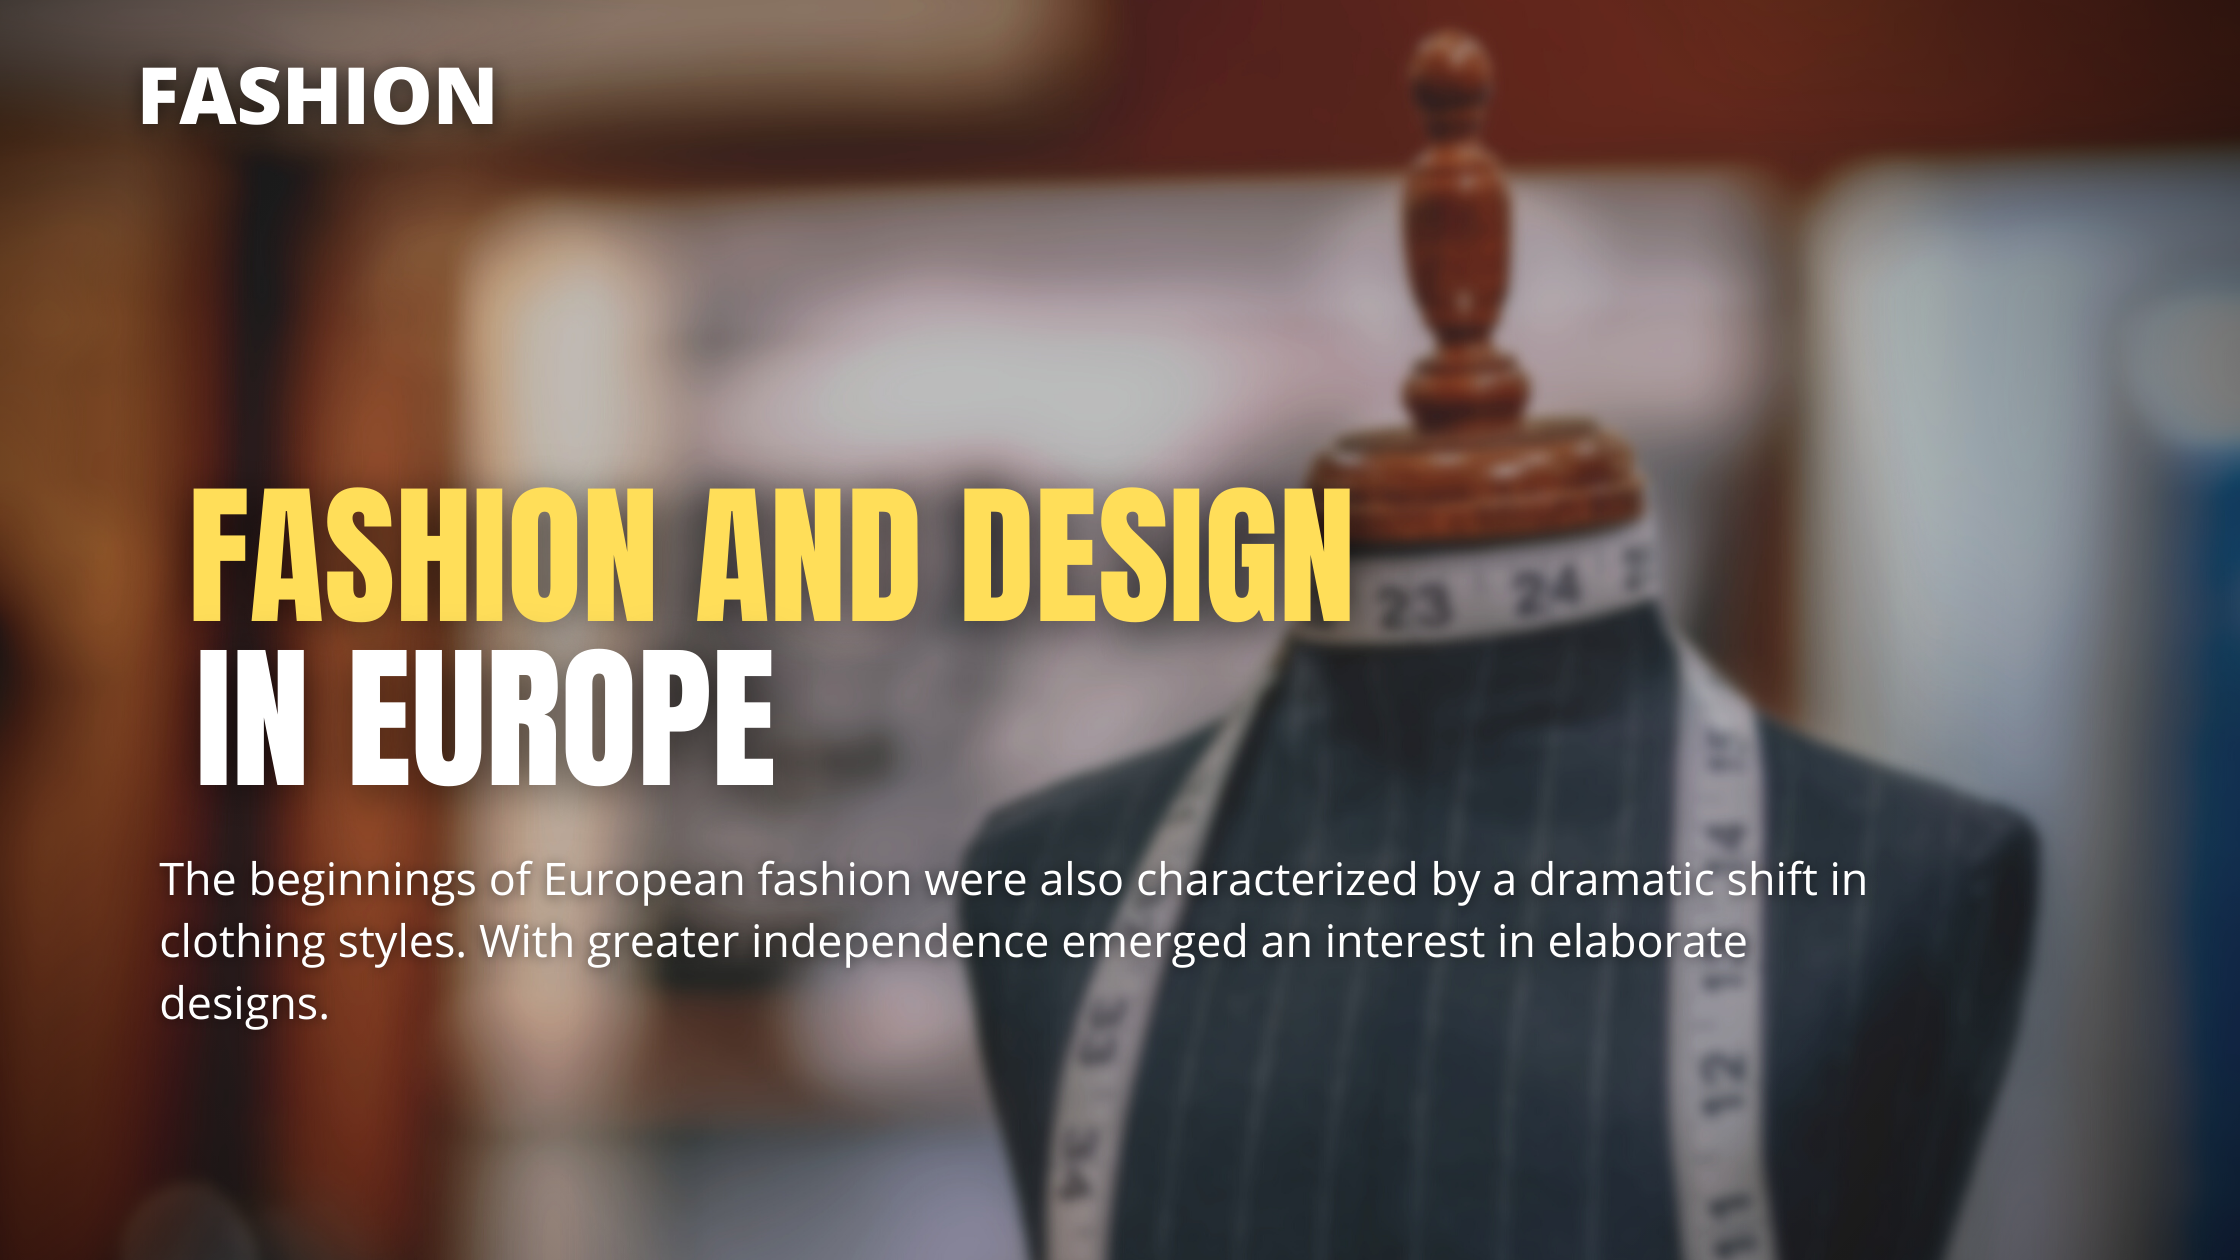 #Fashion and #Design in #Europe and the #western